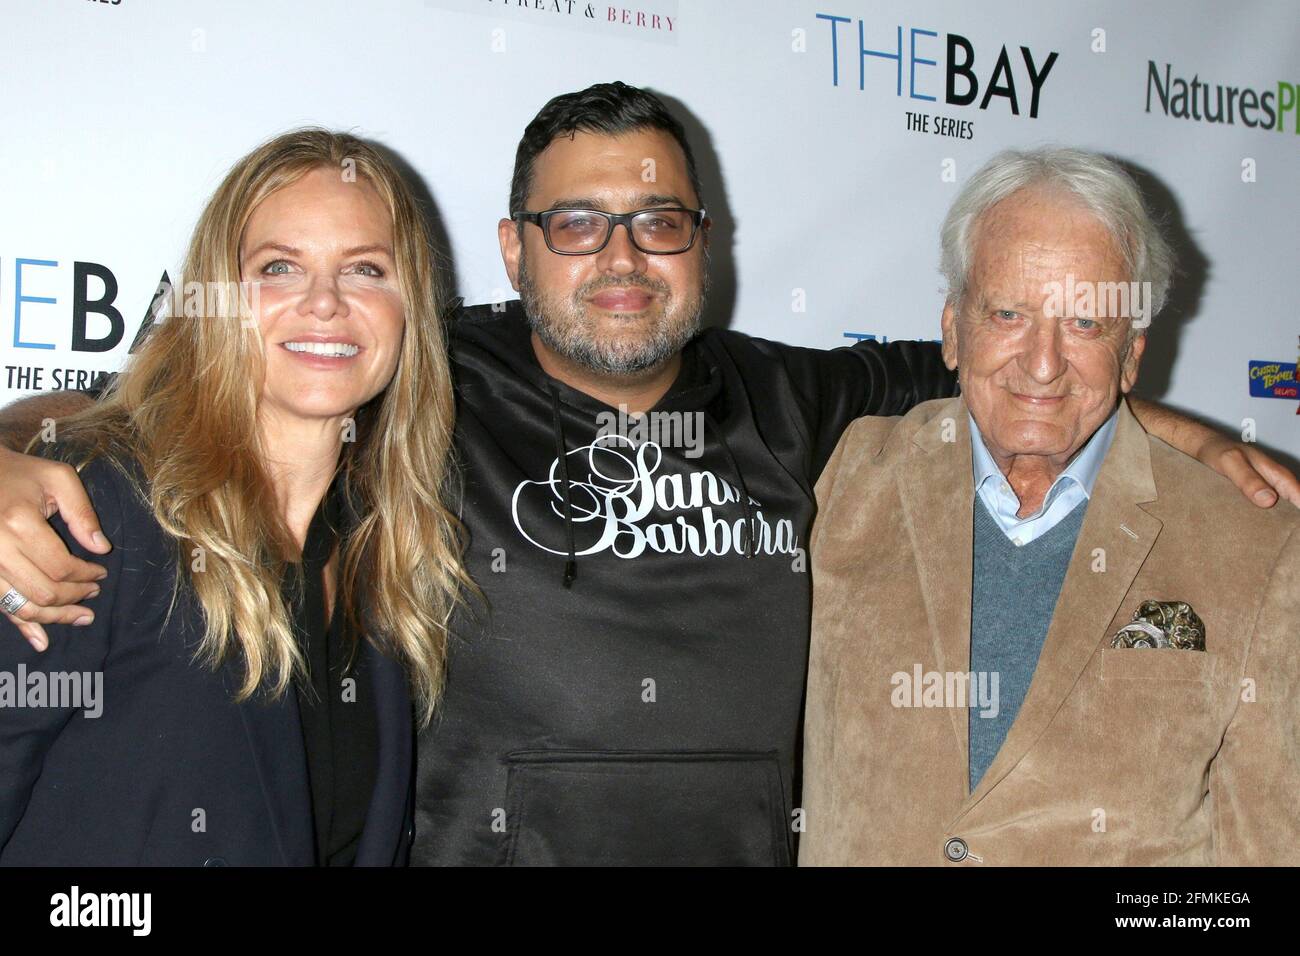 Los Angeles, CA. 8th May, 2021. Carrington Garland, Gregori J Martin, and Nicolas Coster at arrivals for THE BAY Season Finale Screening, West Hollywood, Los Angeles, CA May 8, 2021. Credit: Priscilla Grant/Everett Collection/Alamy Live News Stock Photo